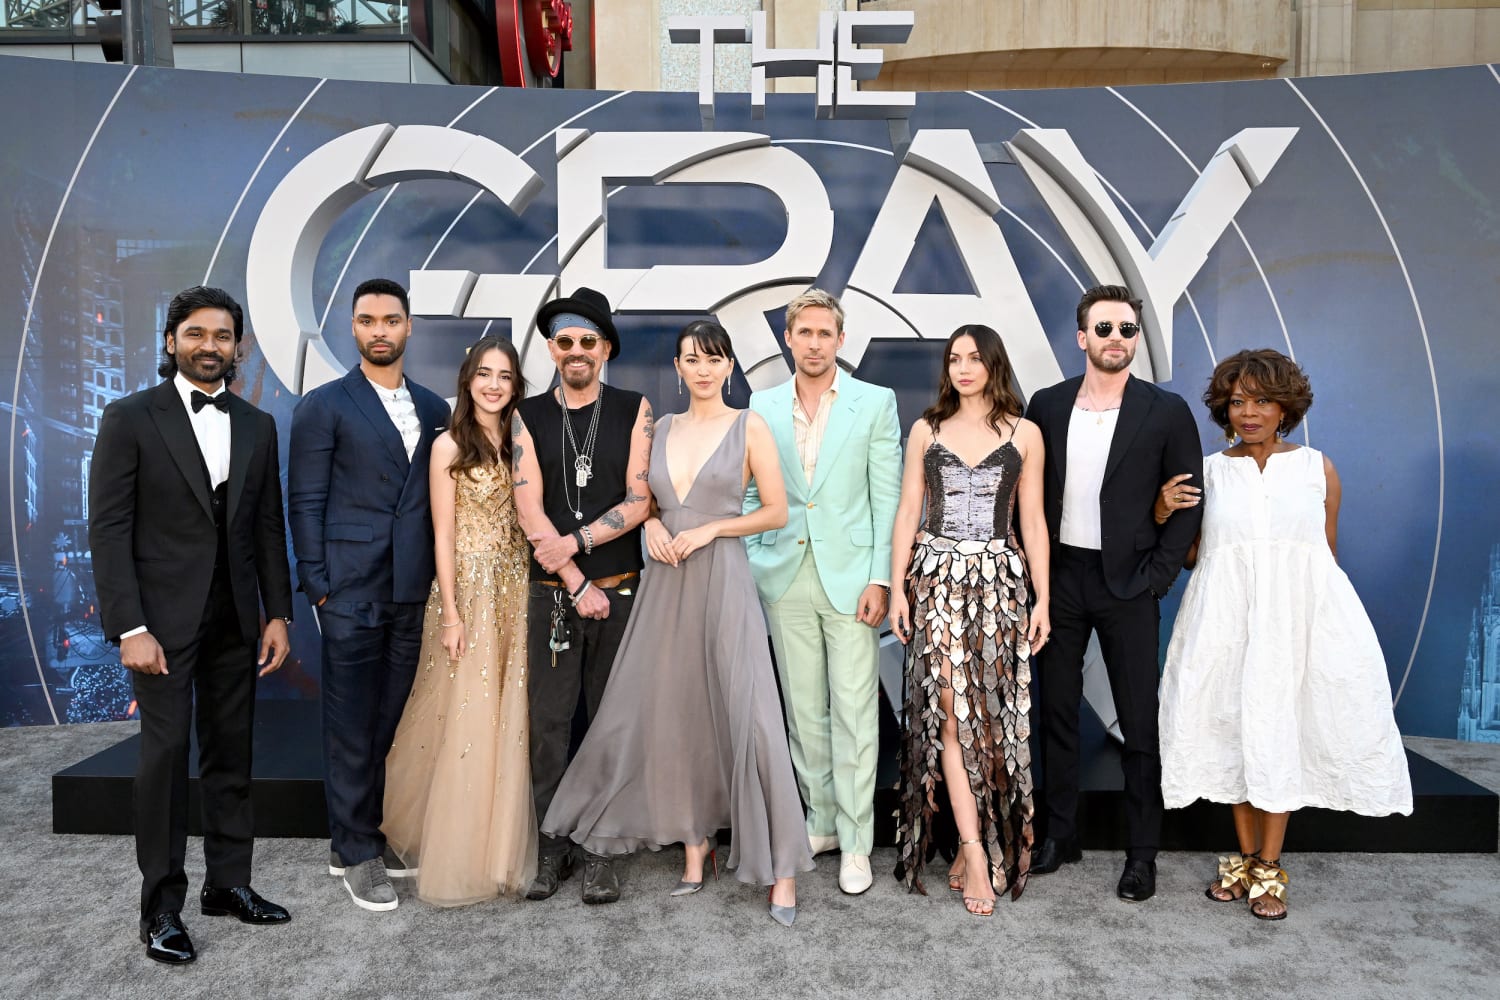 Meet the Incredibly Good-Looking Cast of The Gray Man